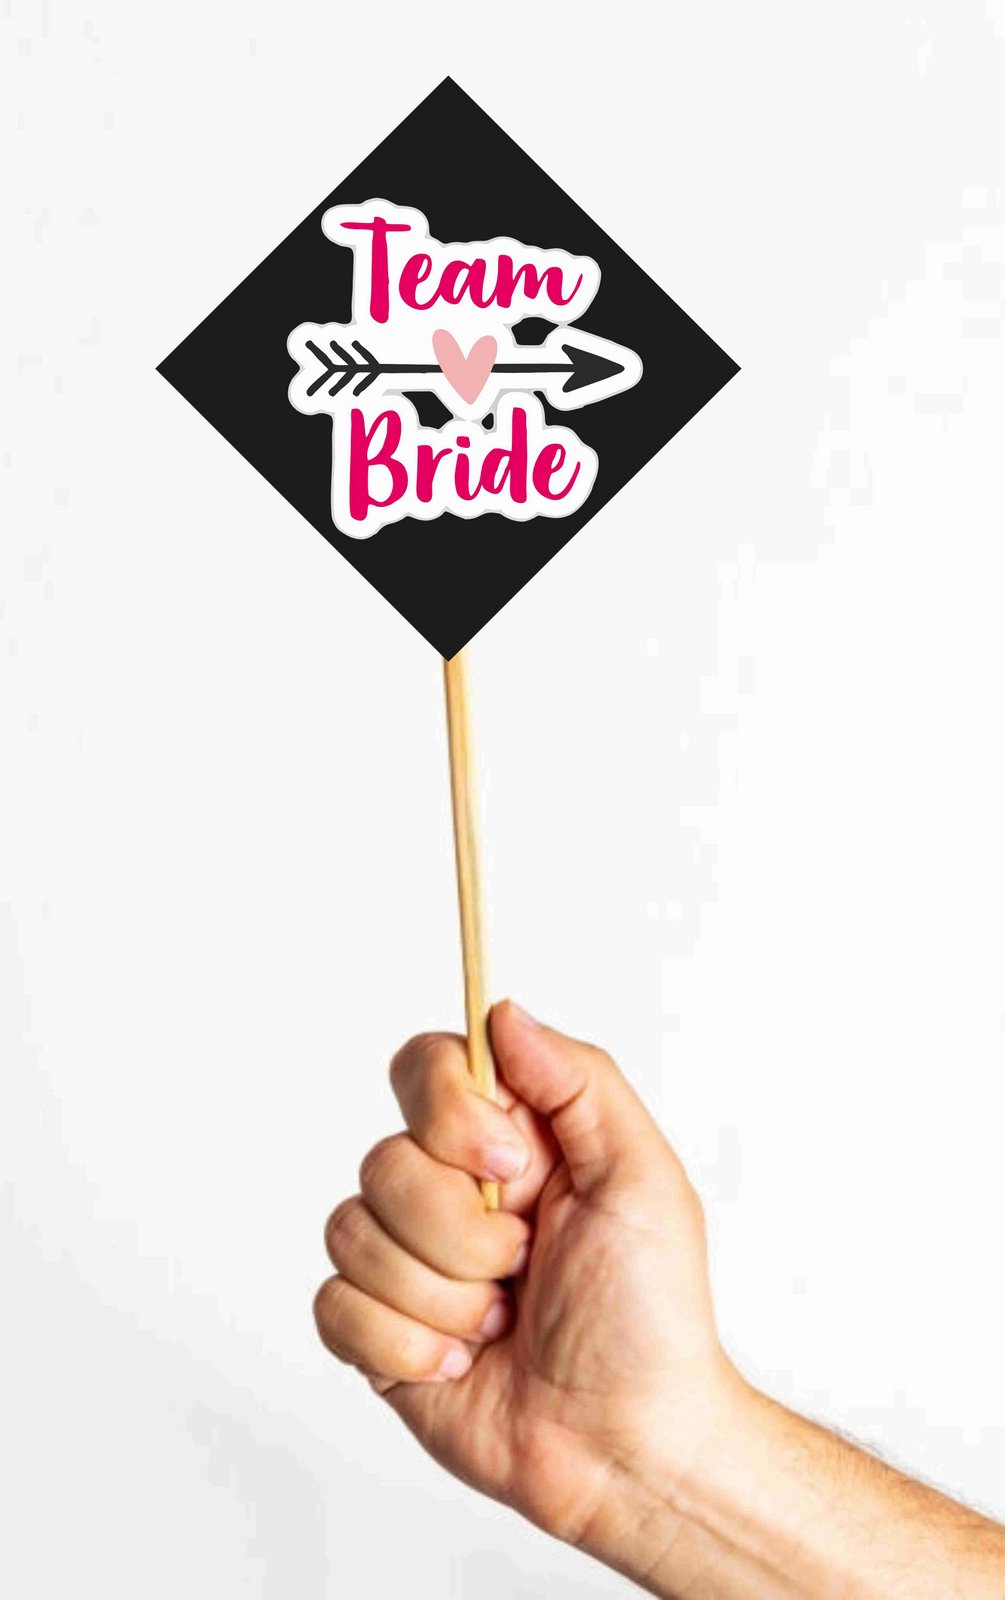 Bride To Be Bachelorette Photo Booth Party Props Theme Party Decoration, Photo Booth Party Item for Adults and Kids